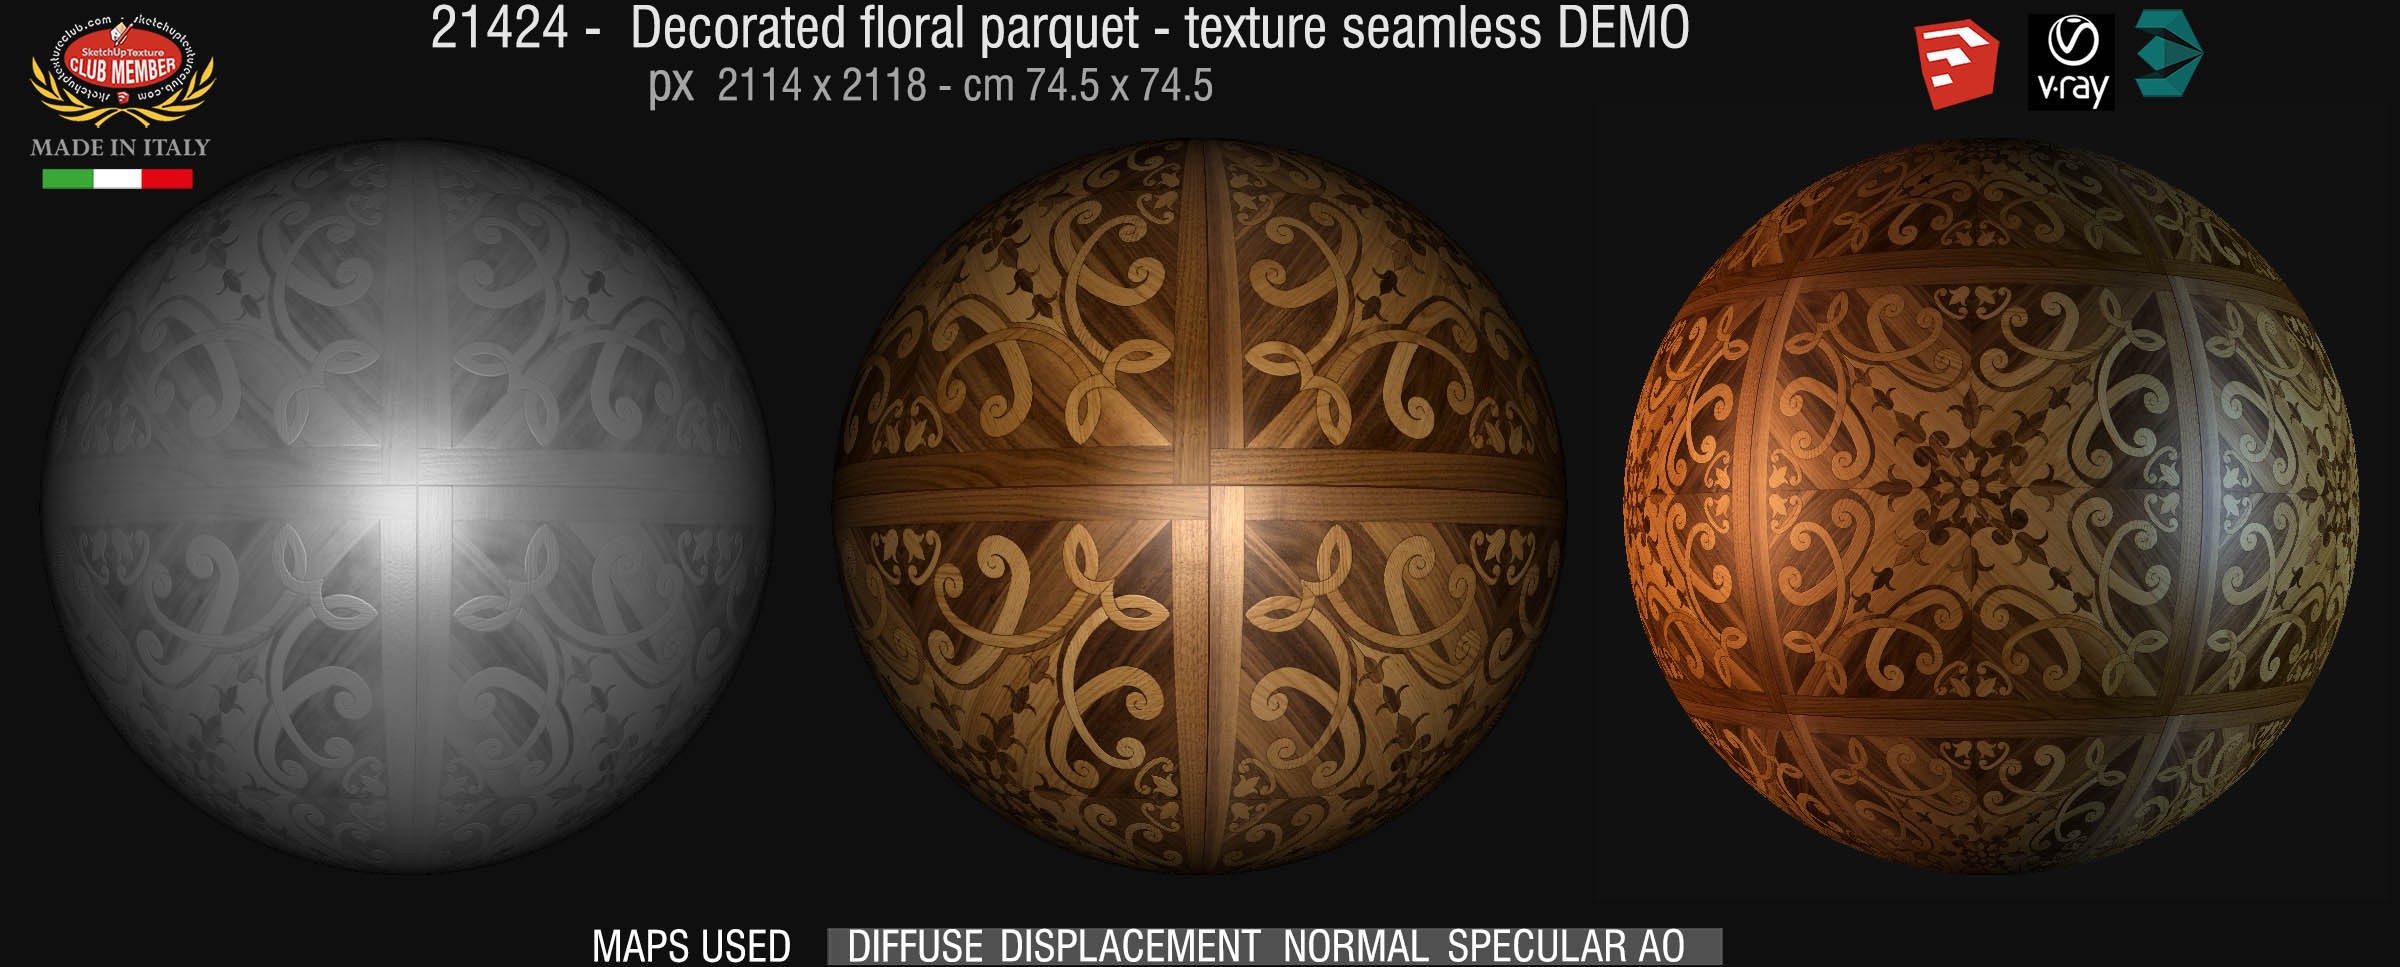 21424 decorated floral parquet texture seamless + maps DEMO